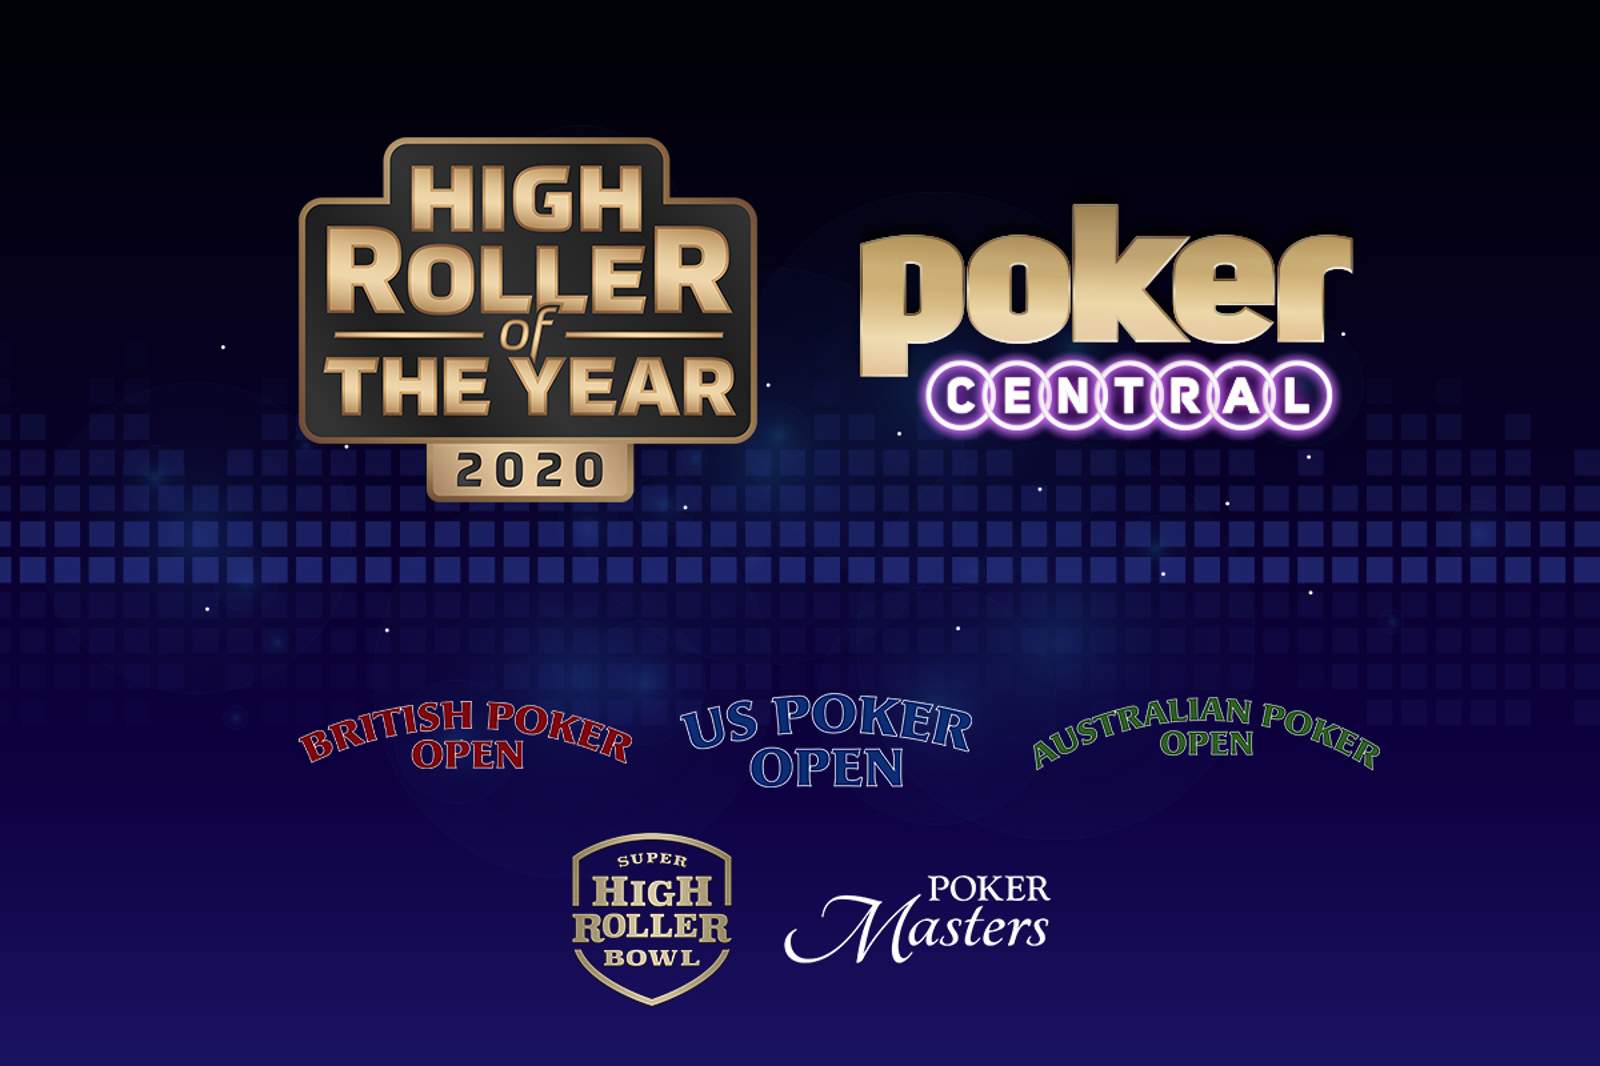 U.S. Poker Open 2020 Dates & $100,000 Prize Pool Announced for High Roller of the Year